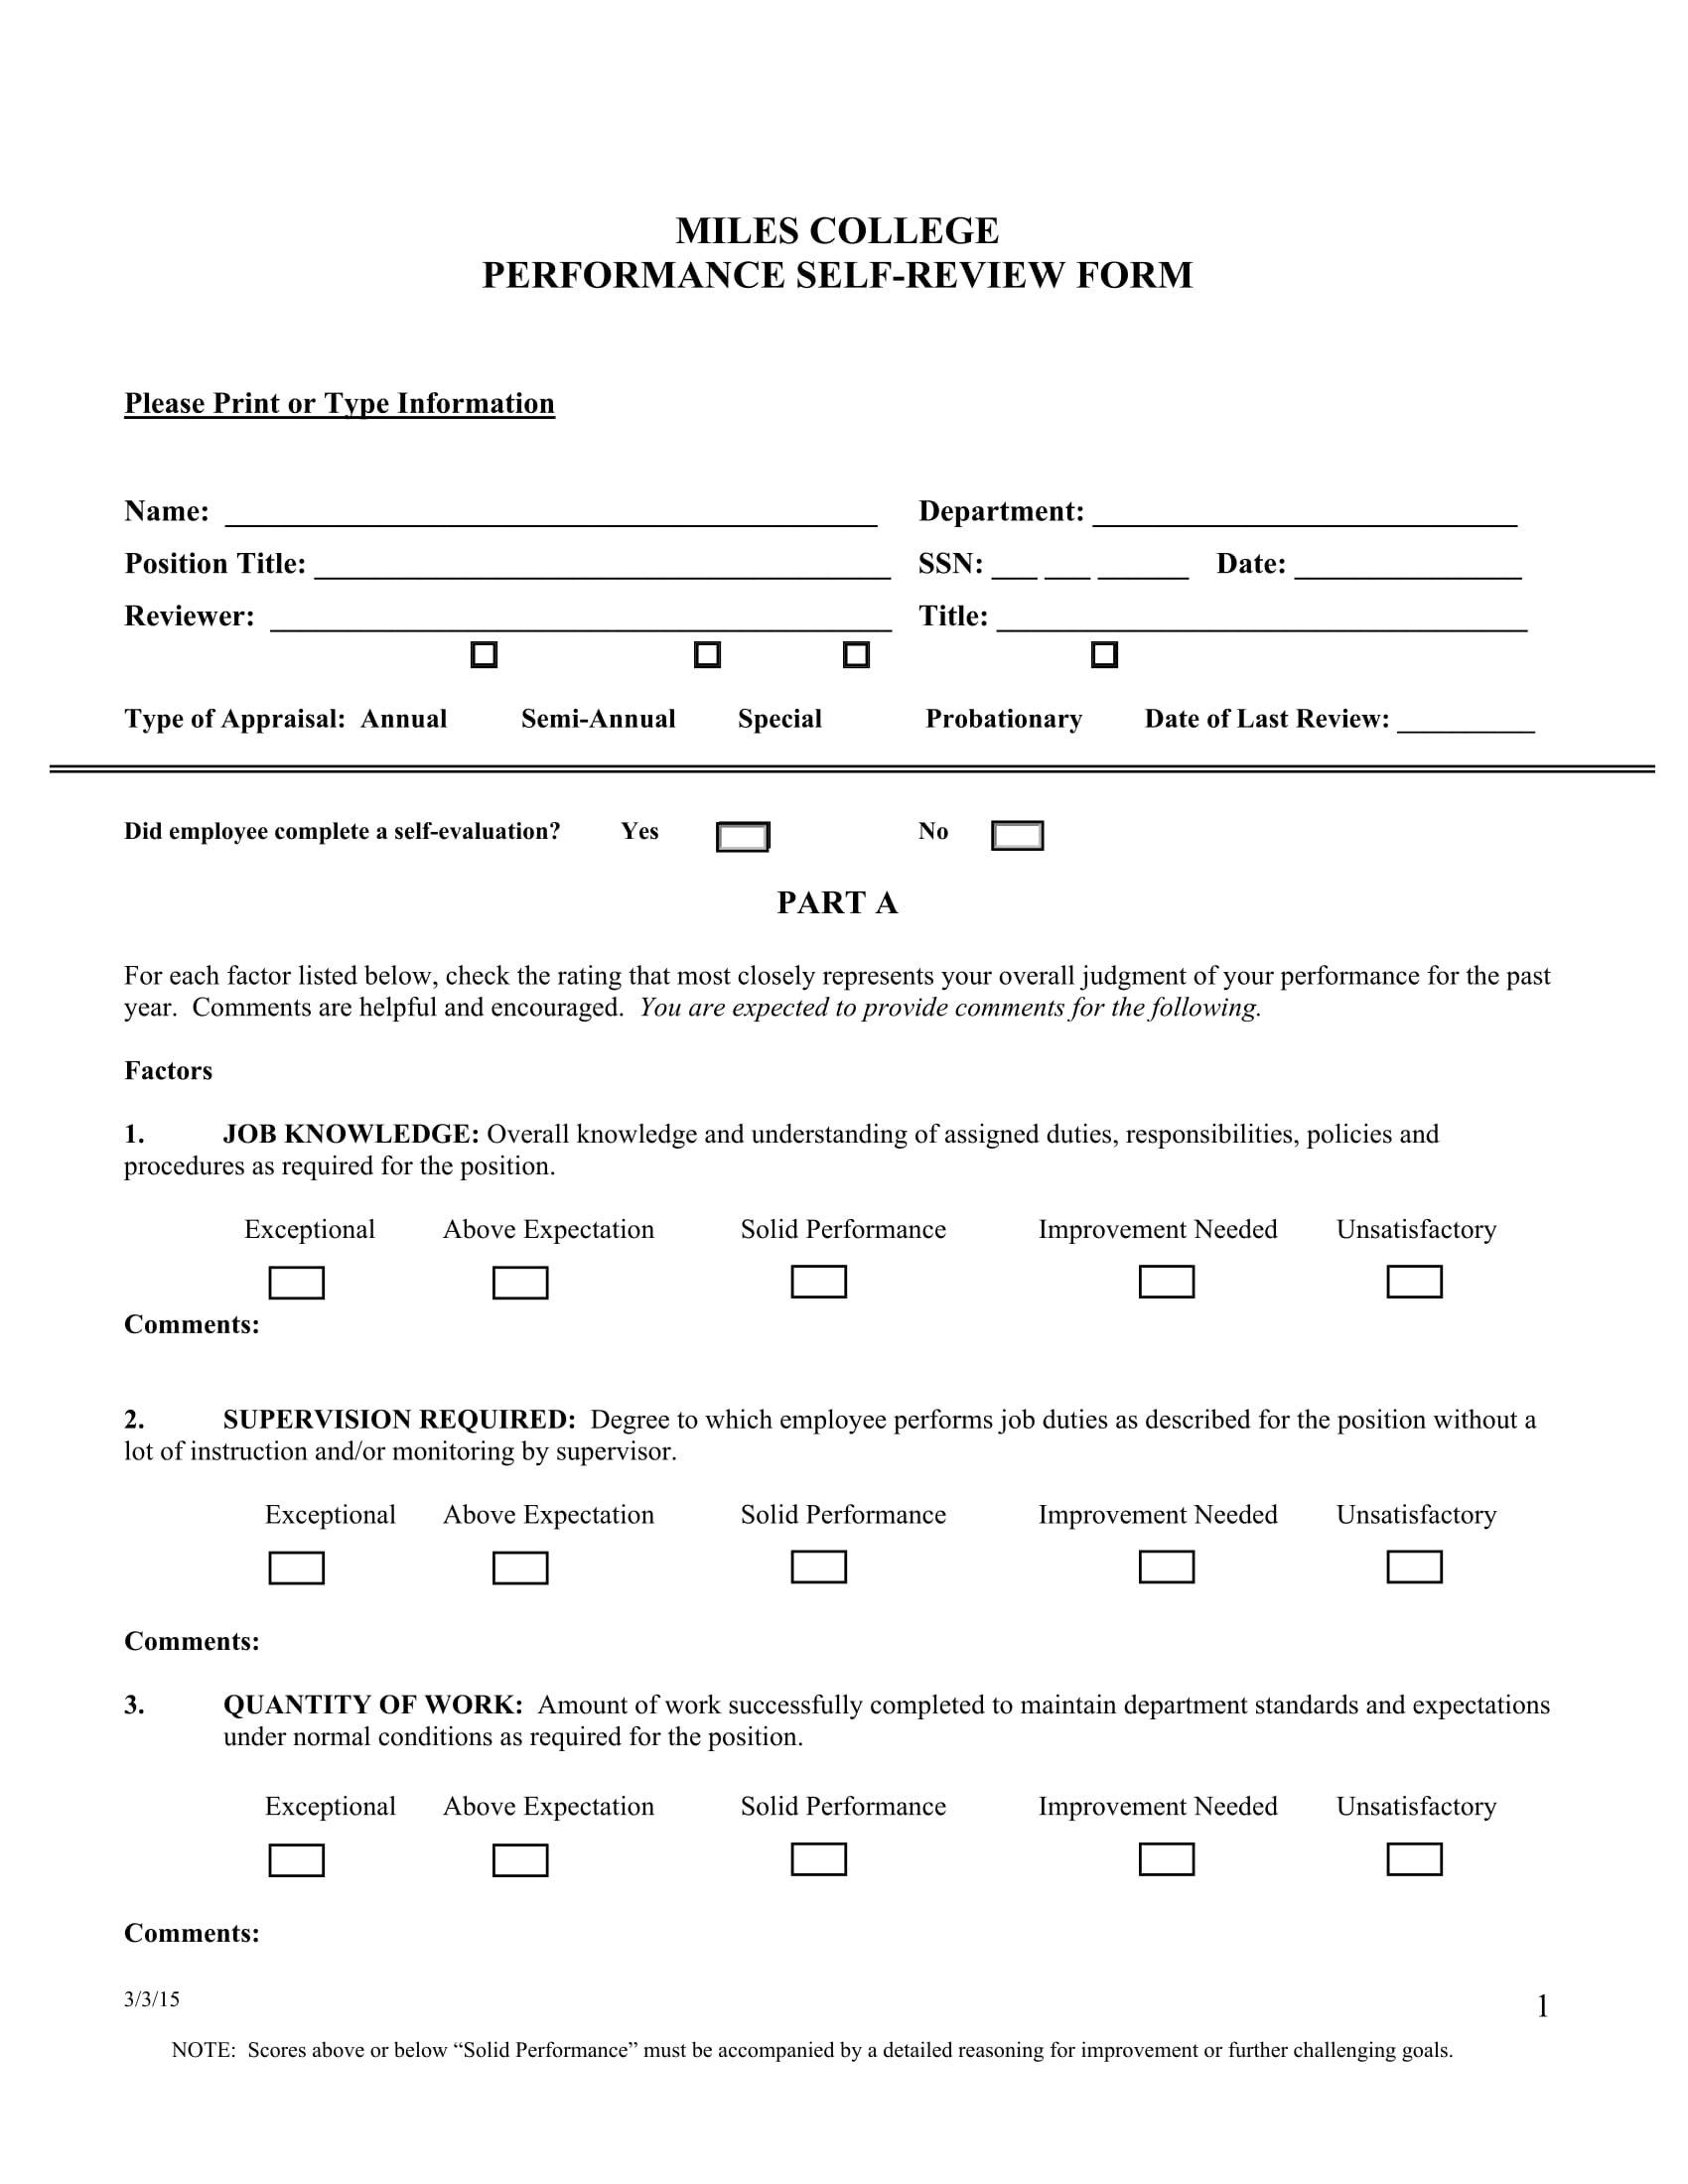 performance self review form 1